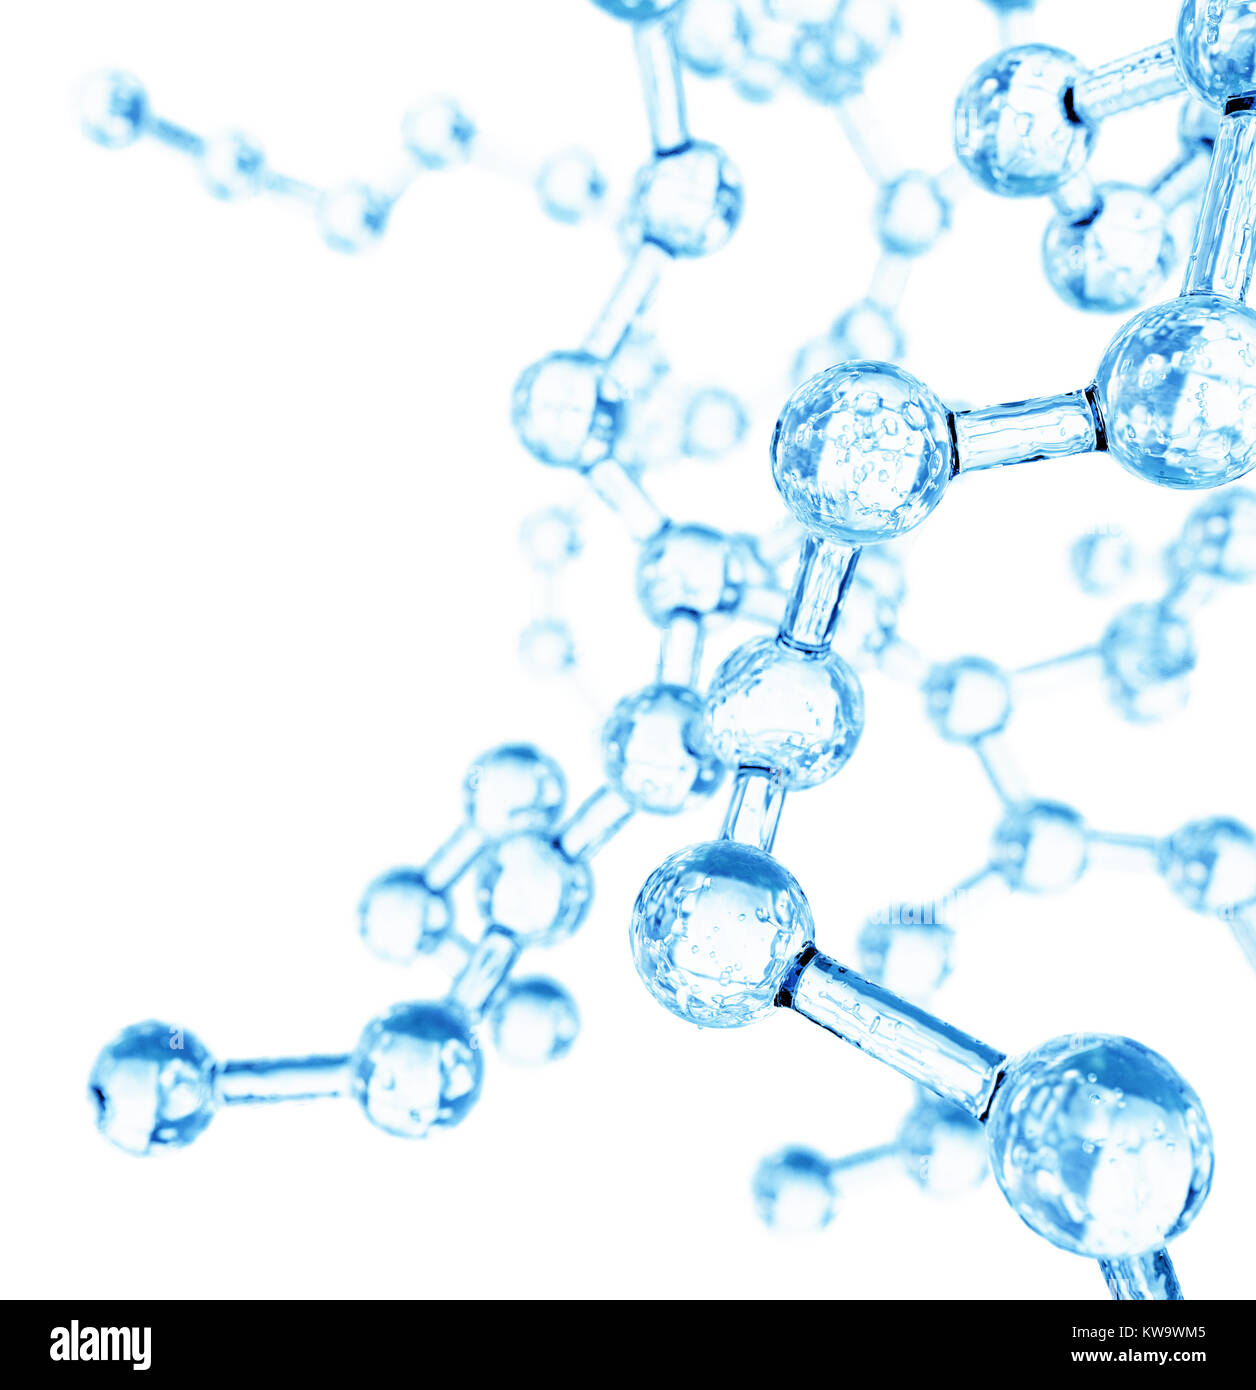 Molecular Structure Abstract Background. 3D illustration Stock Photo